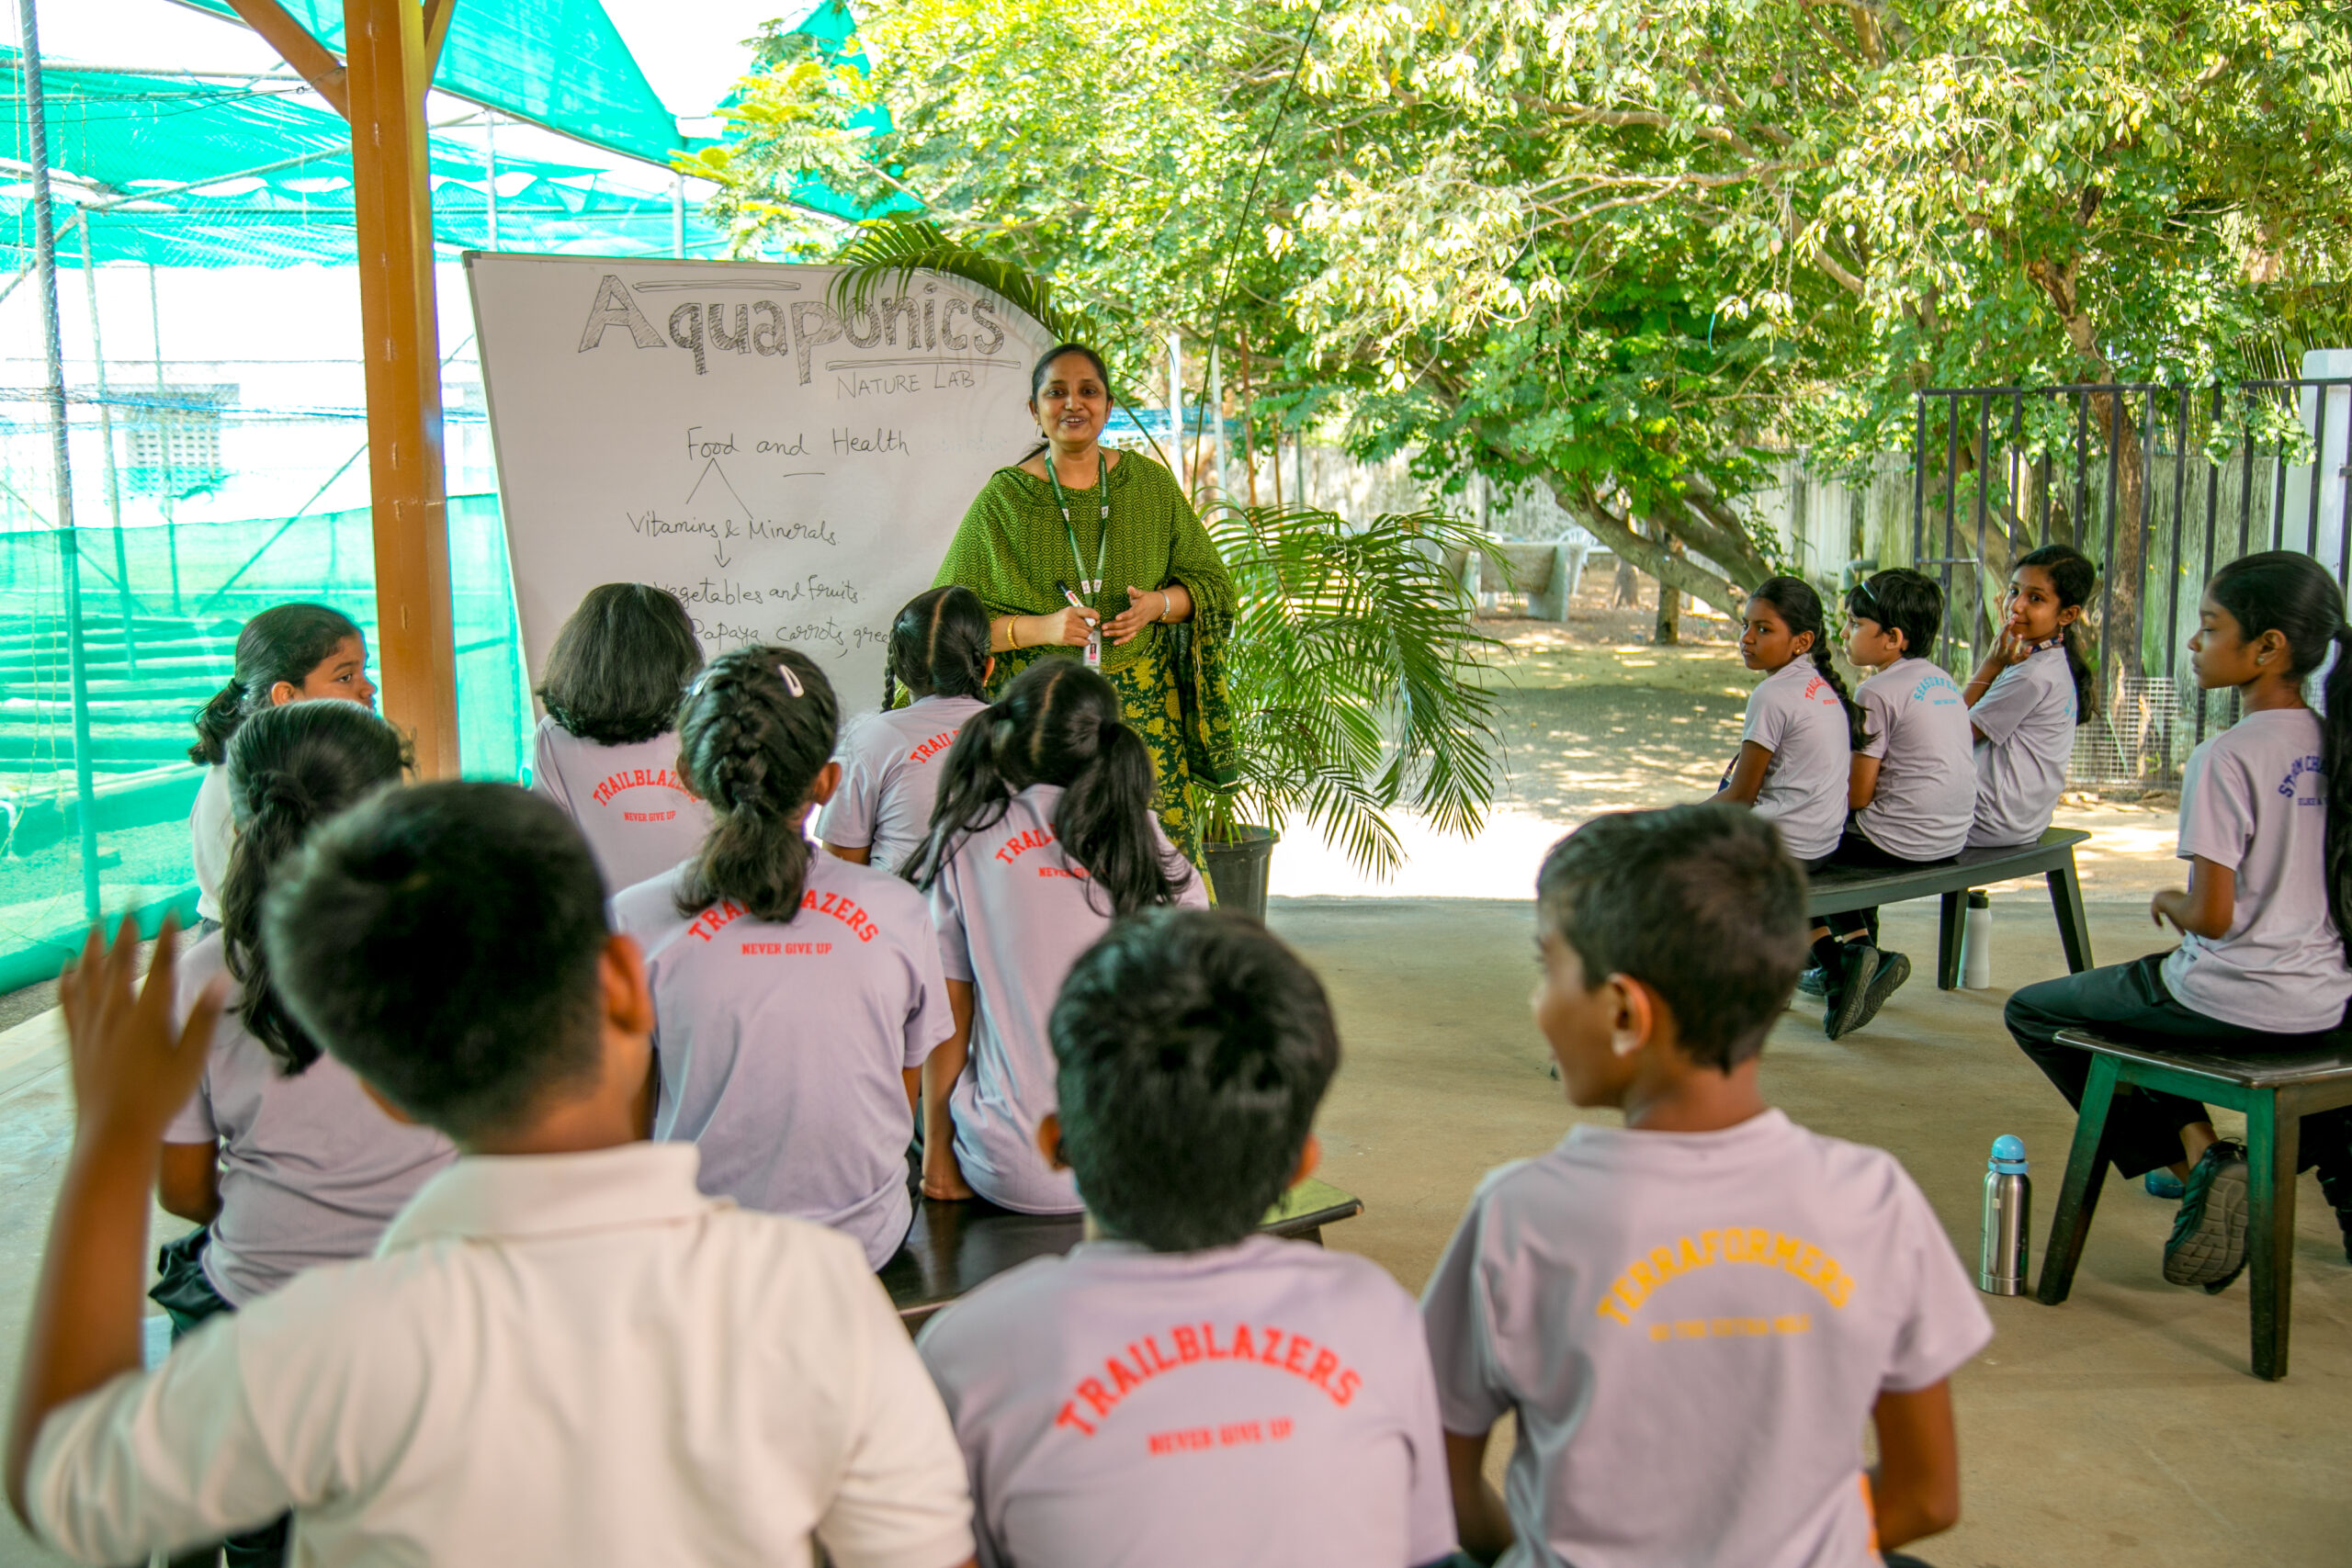 A school teacher is teaching little school students, who are seen sitting on a bench, a lesson about Aquaponics with the help of a white board and marker.